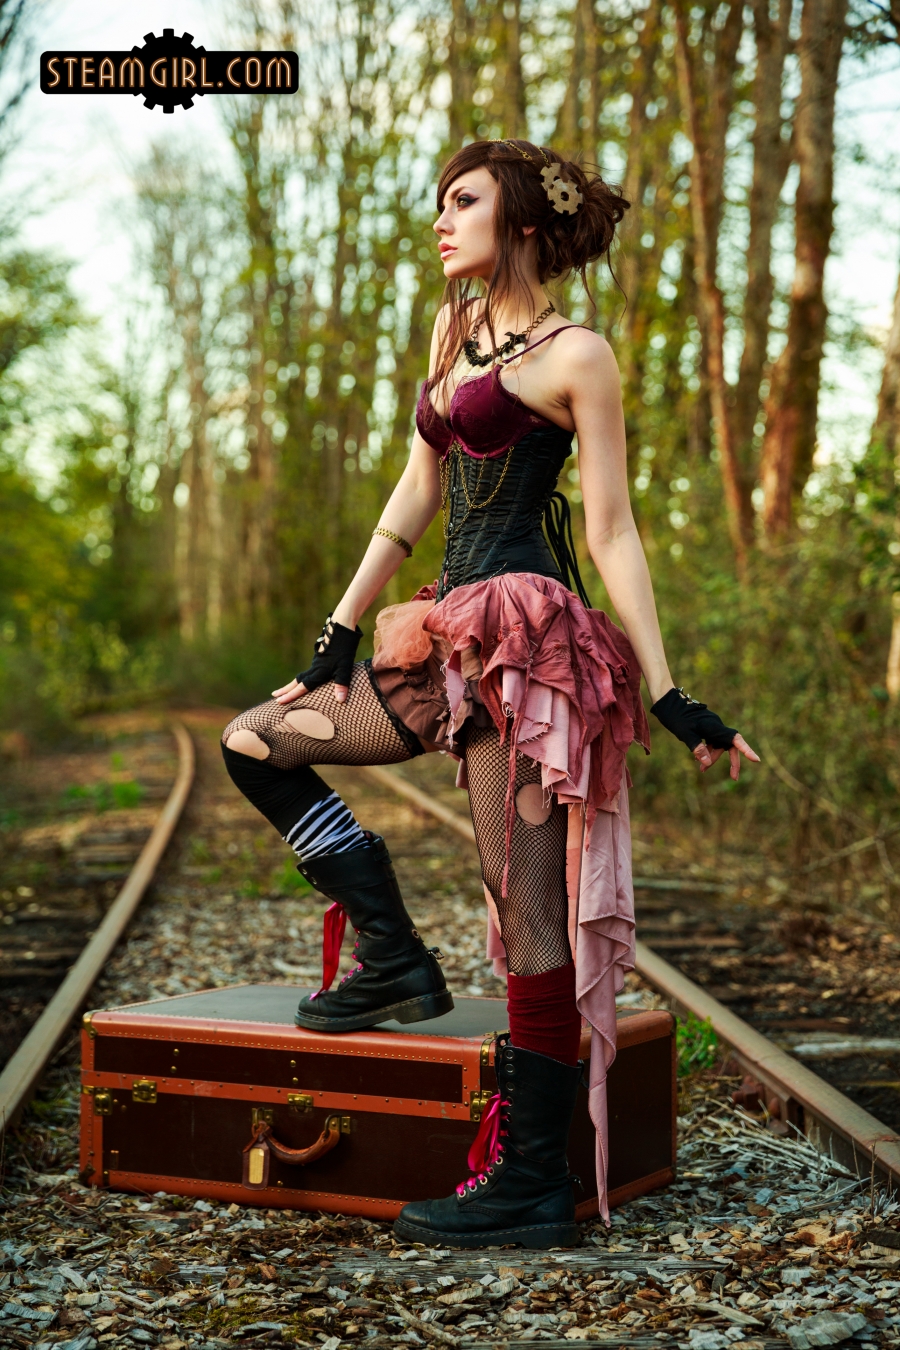 People 900x1350 women brunette hairbun hair accessories makeup looking away necklace steampunk corset black clothing skirt fishnet torn clothes knee high socks boots chests railway outdoors gloves Doc Martens steam girl A. Nomaly portrait display watermarked